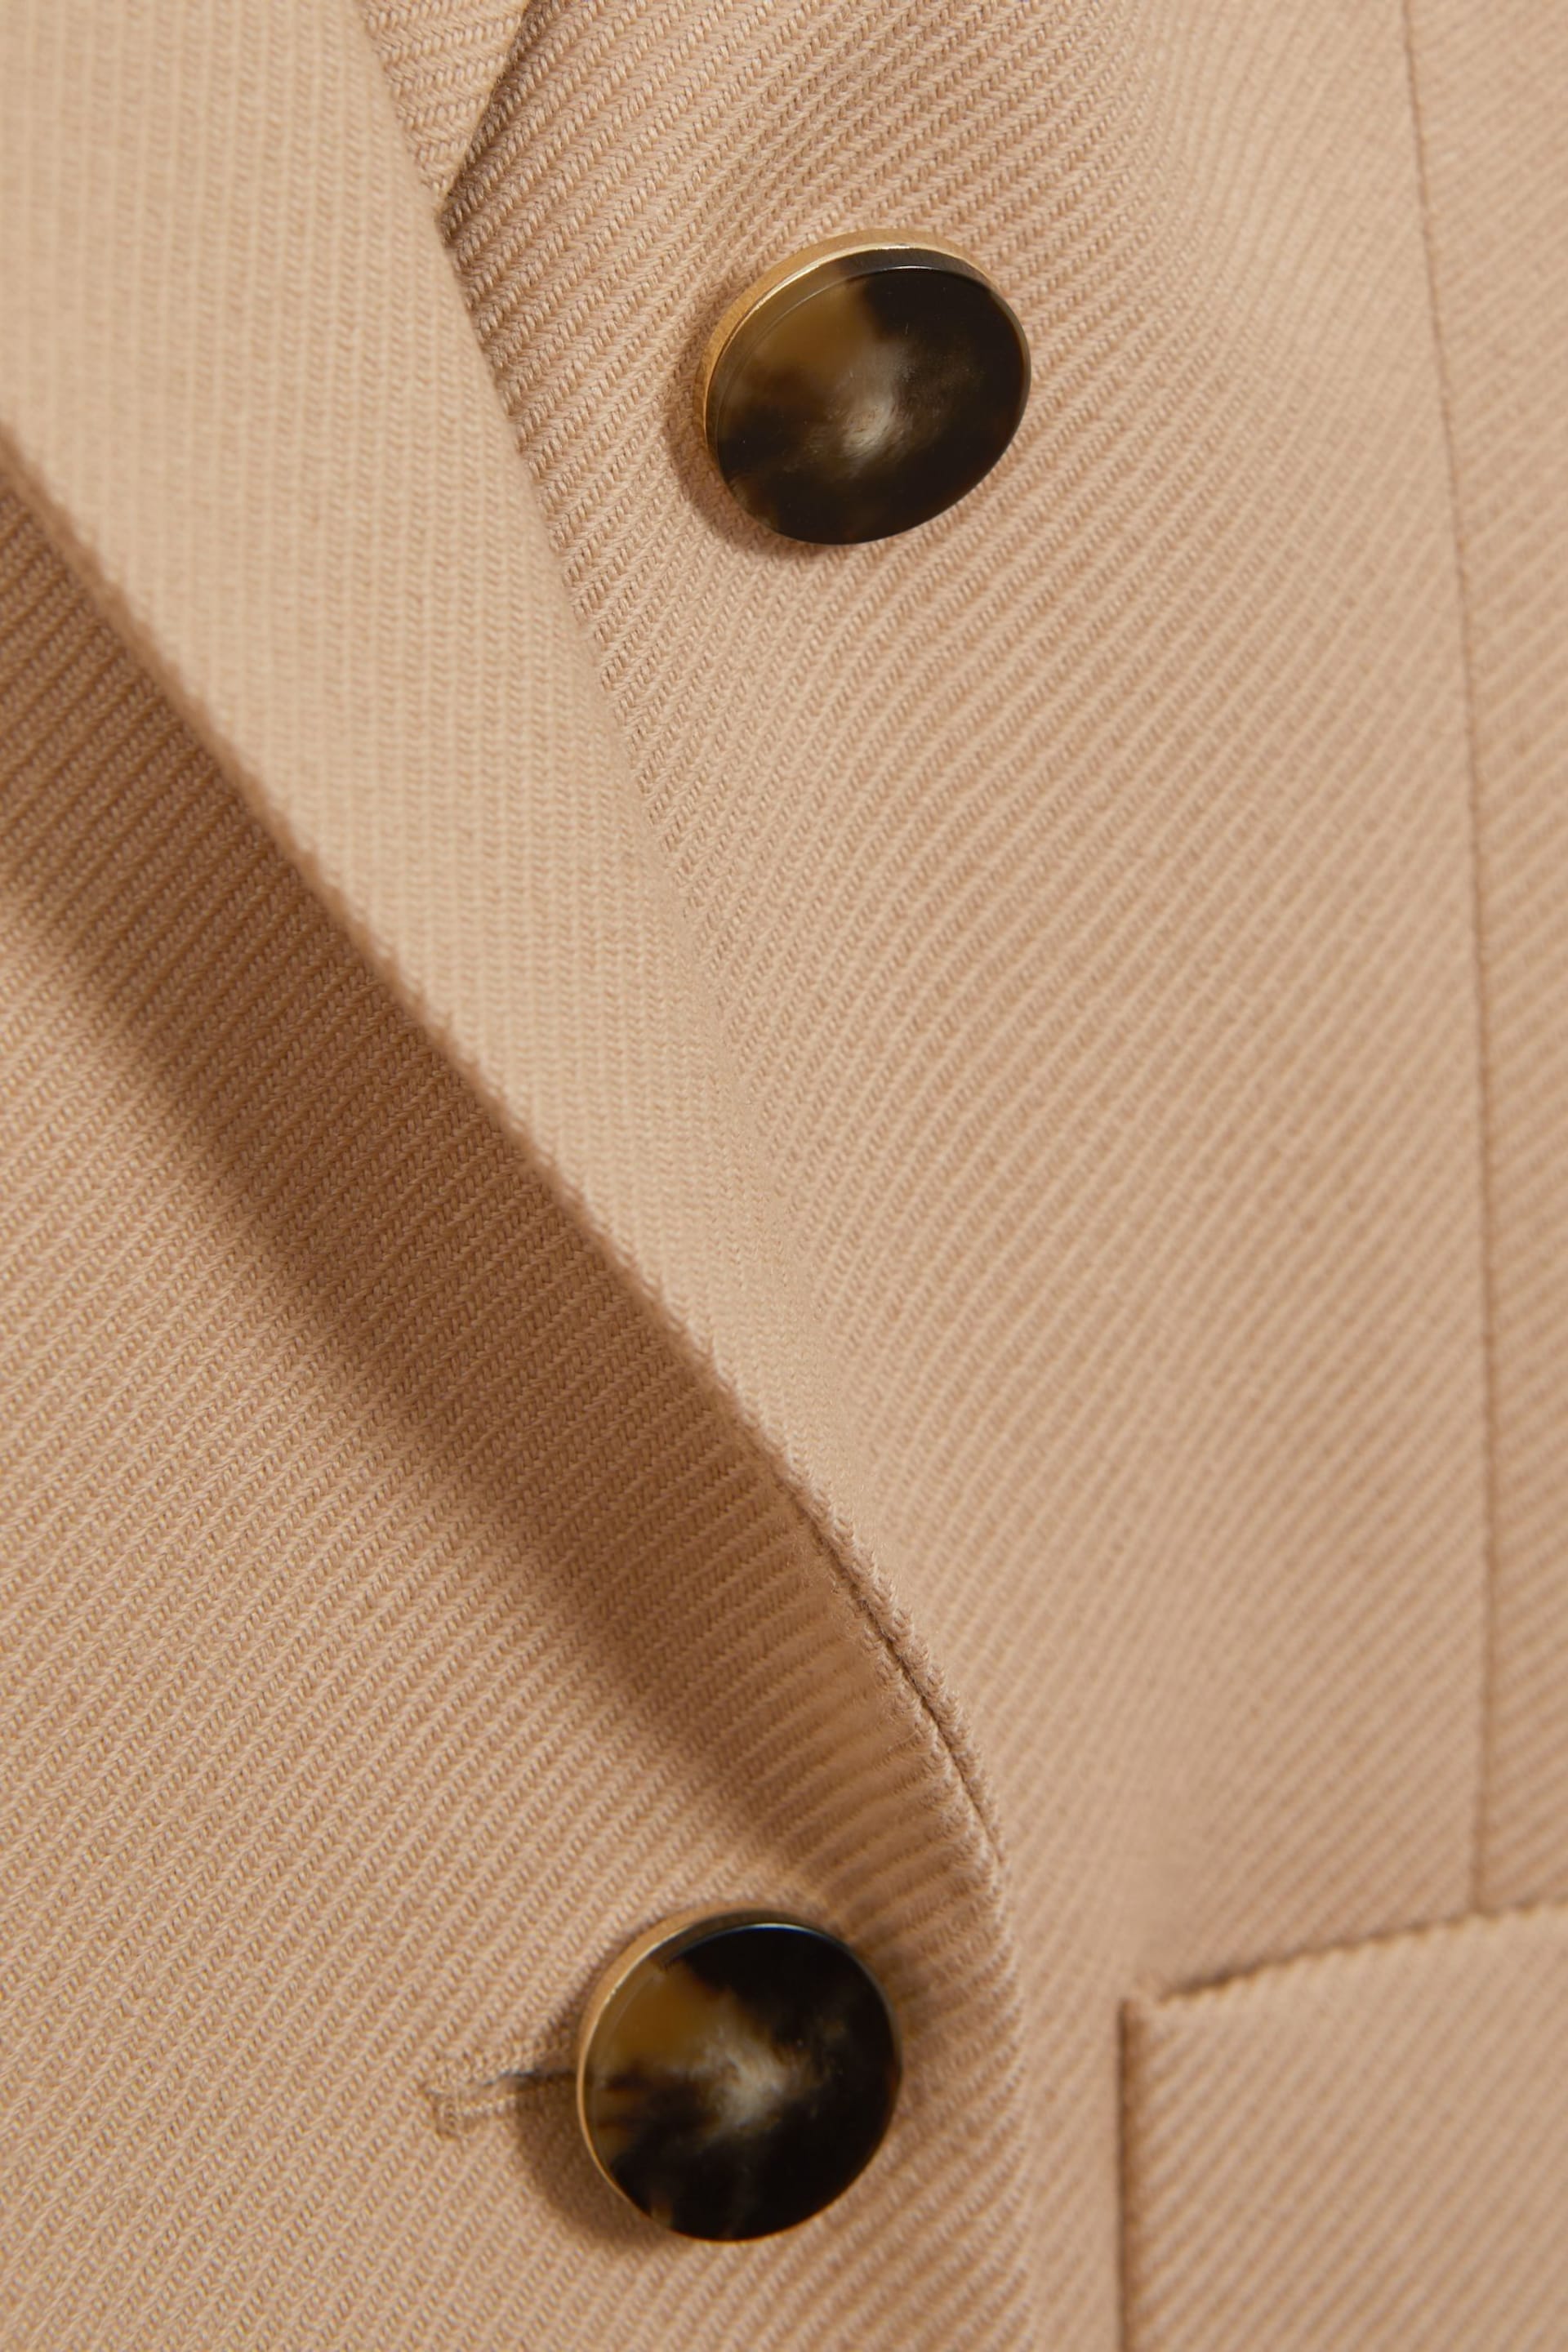 Reiss Light Camel Larsson Petite Double Breasted Twill Blazer - Image 7 of 7